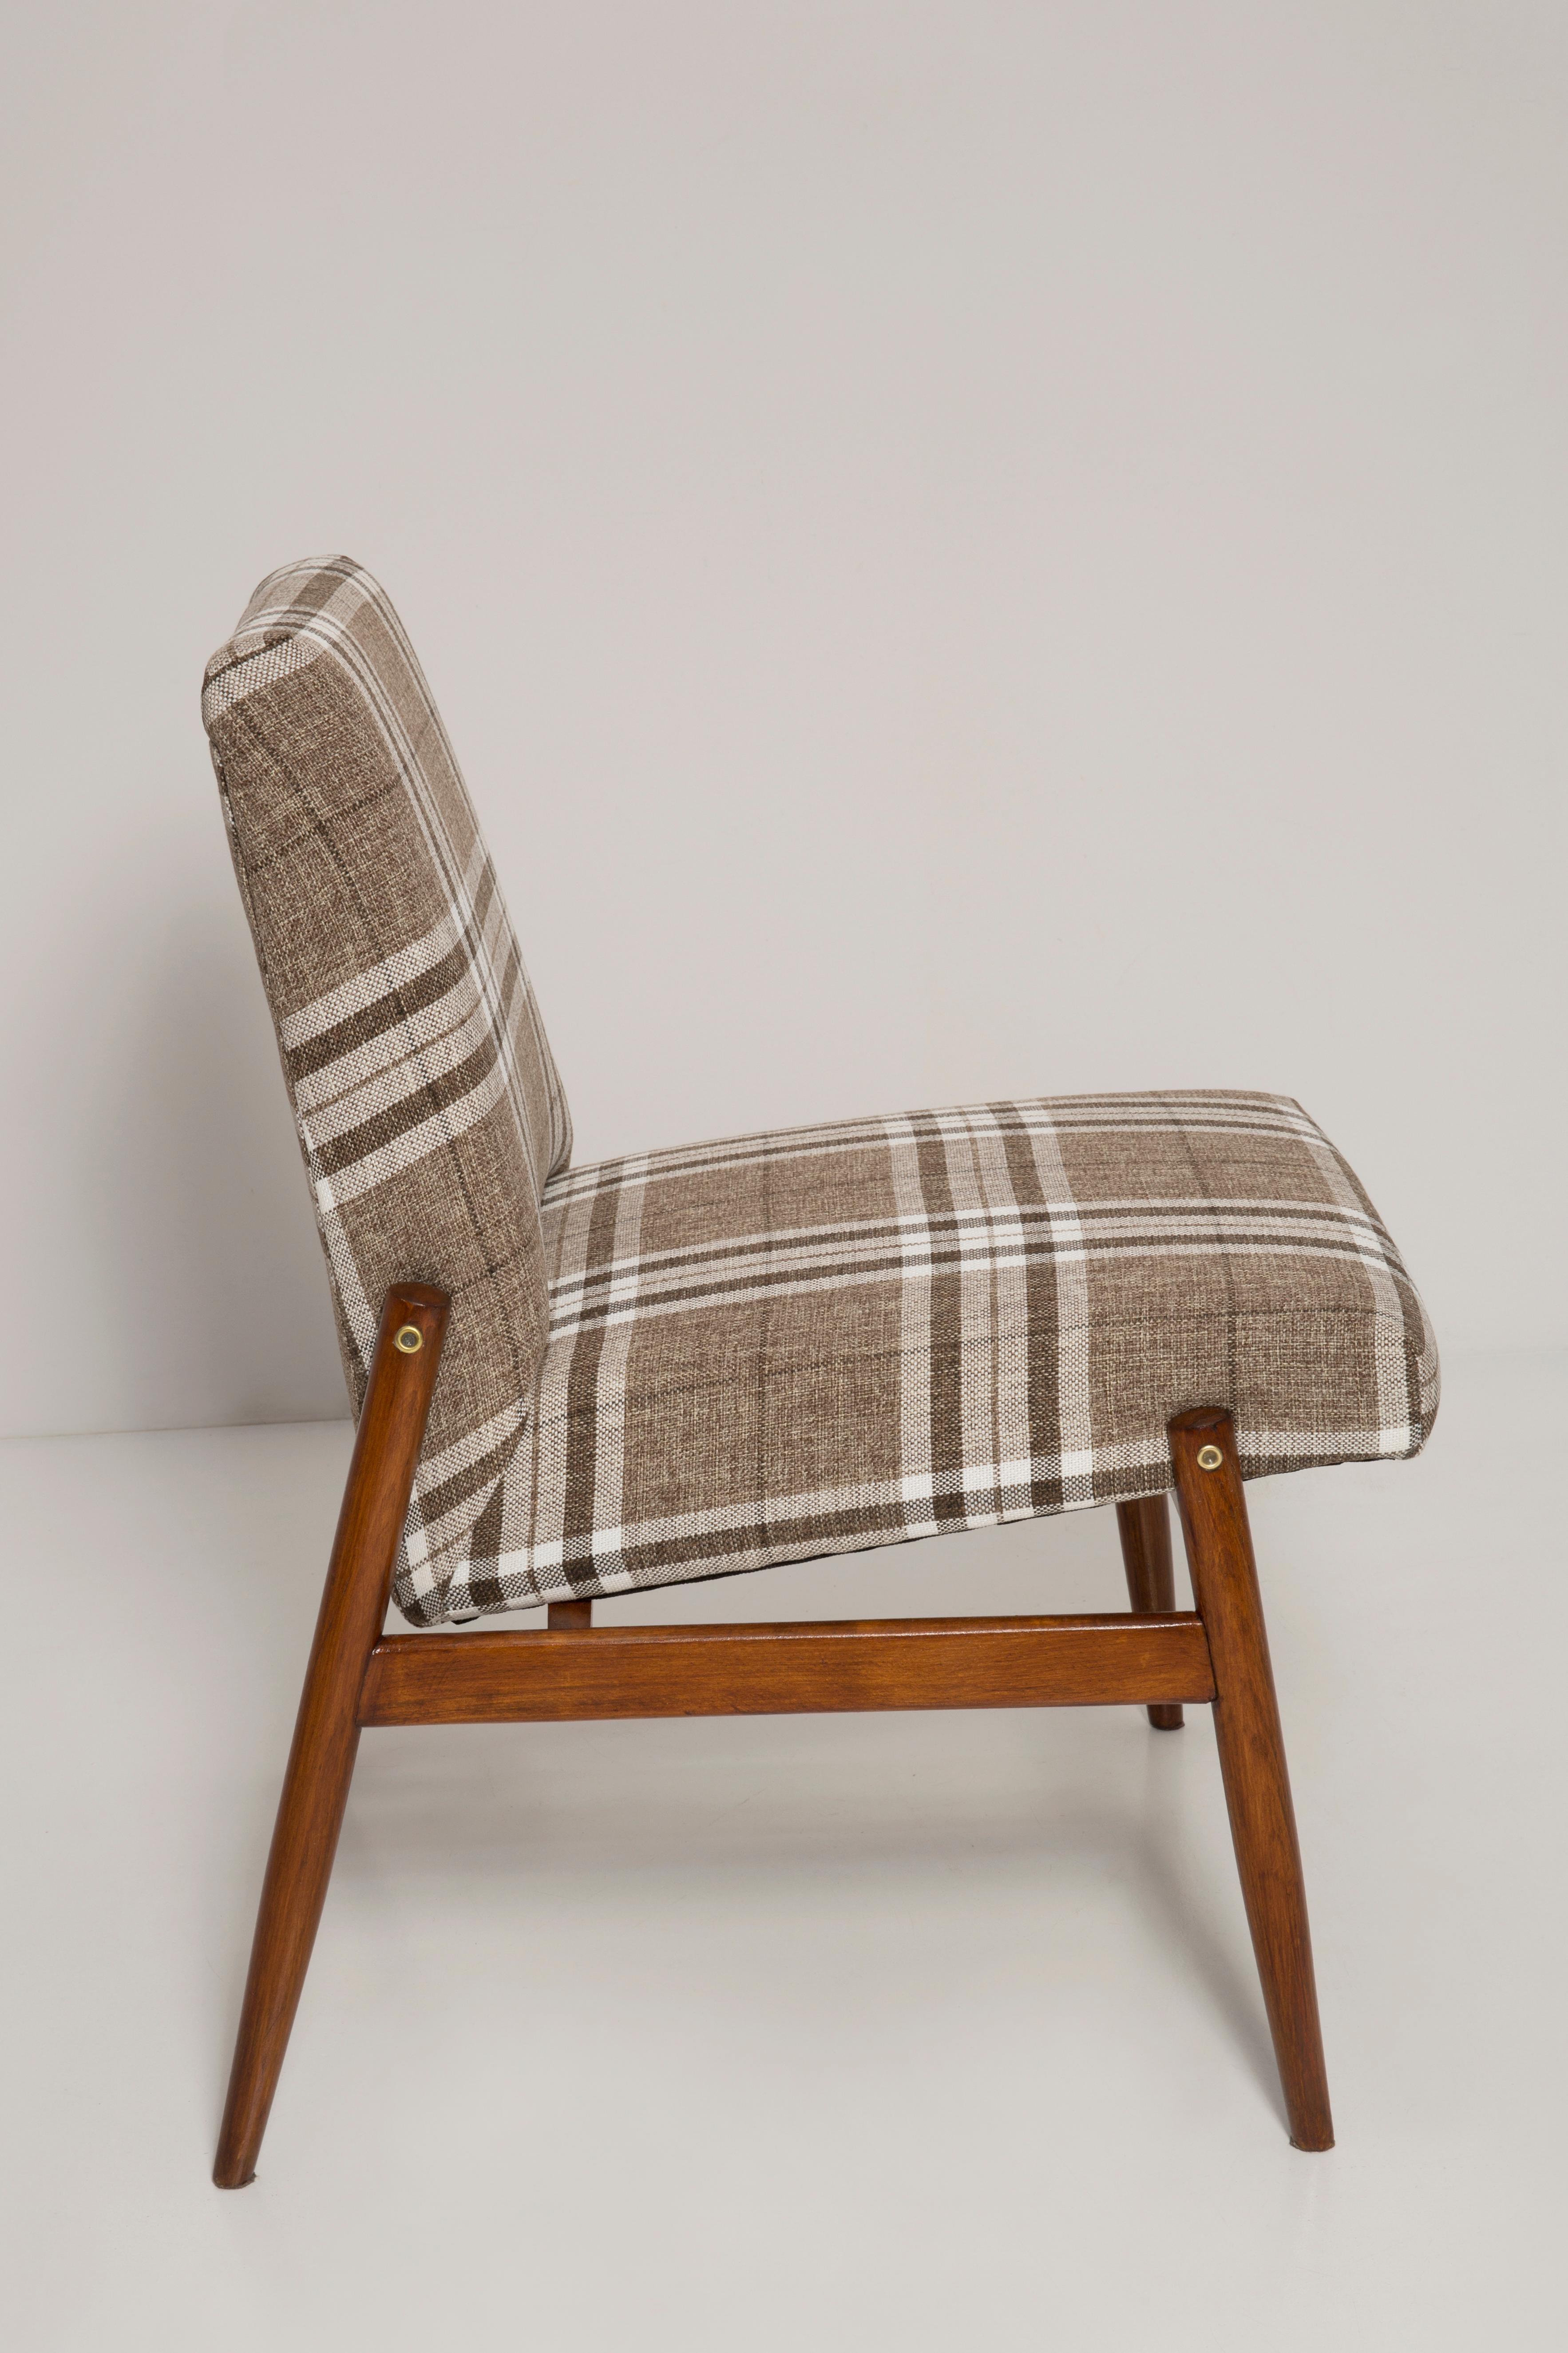 Hand-Crafted 20th Century Beige Checkered Fabric Armchair, 300-227 Type, Europe, 1960s For Sale